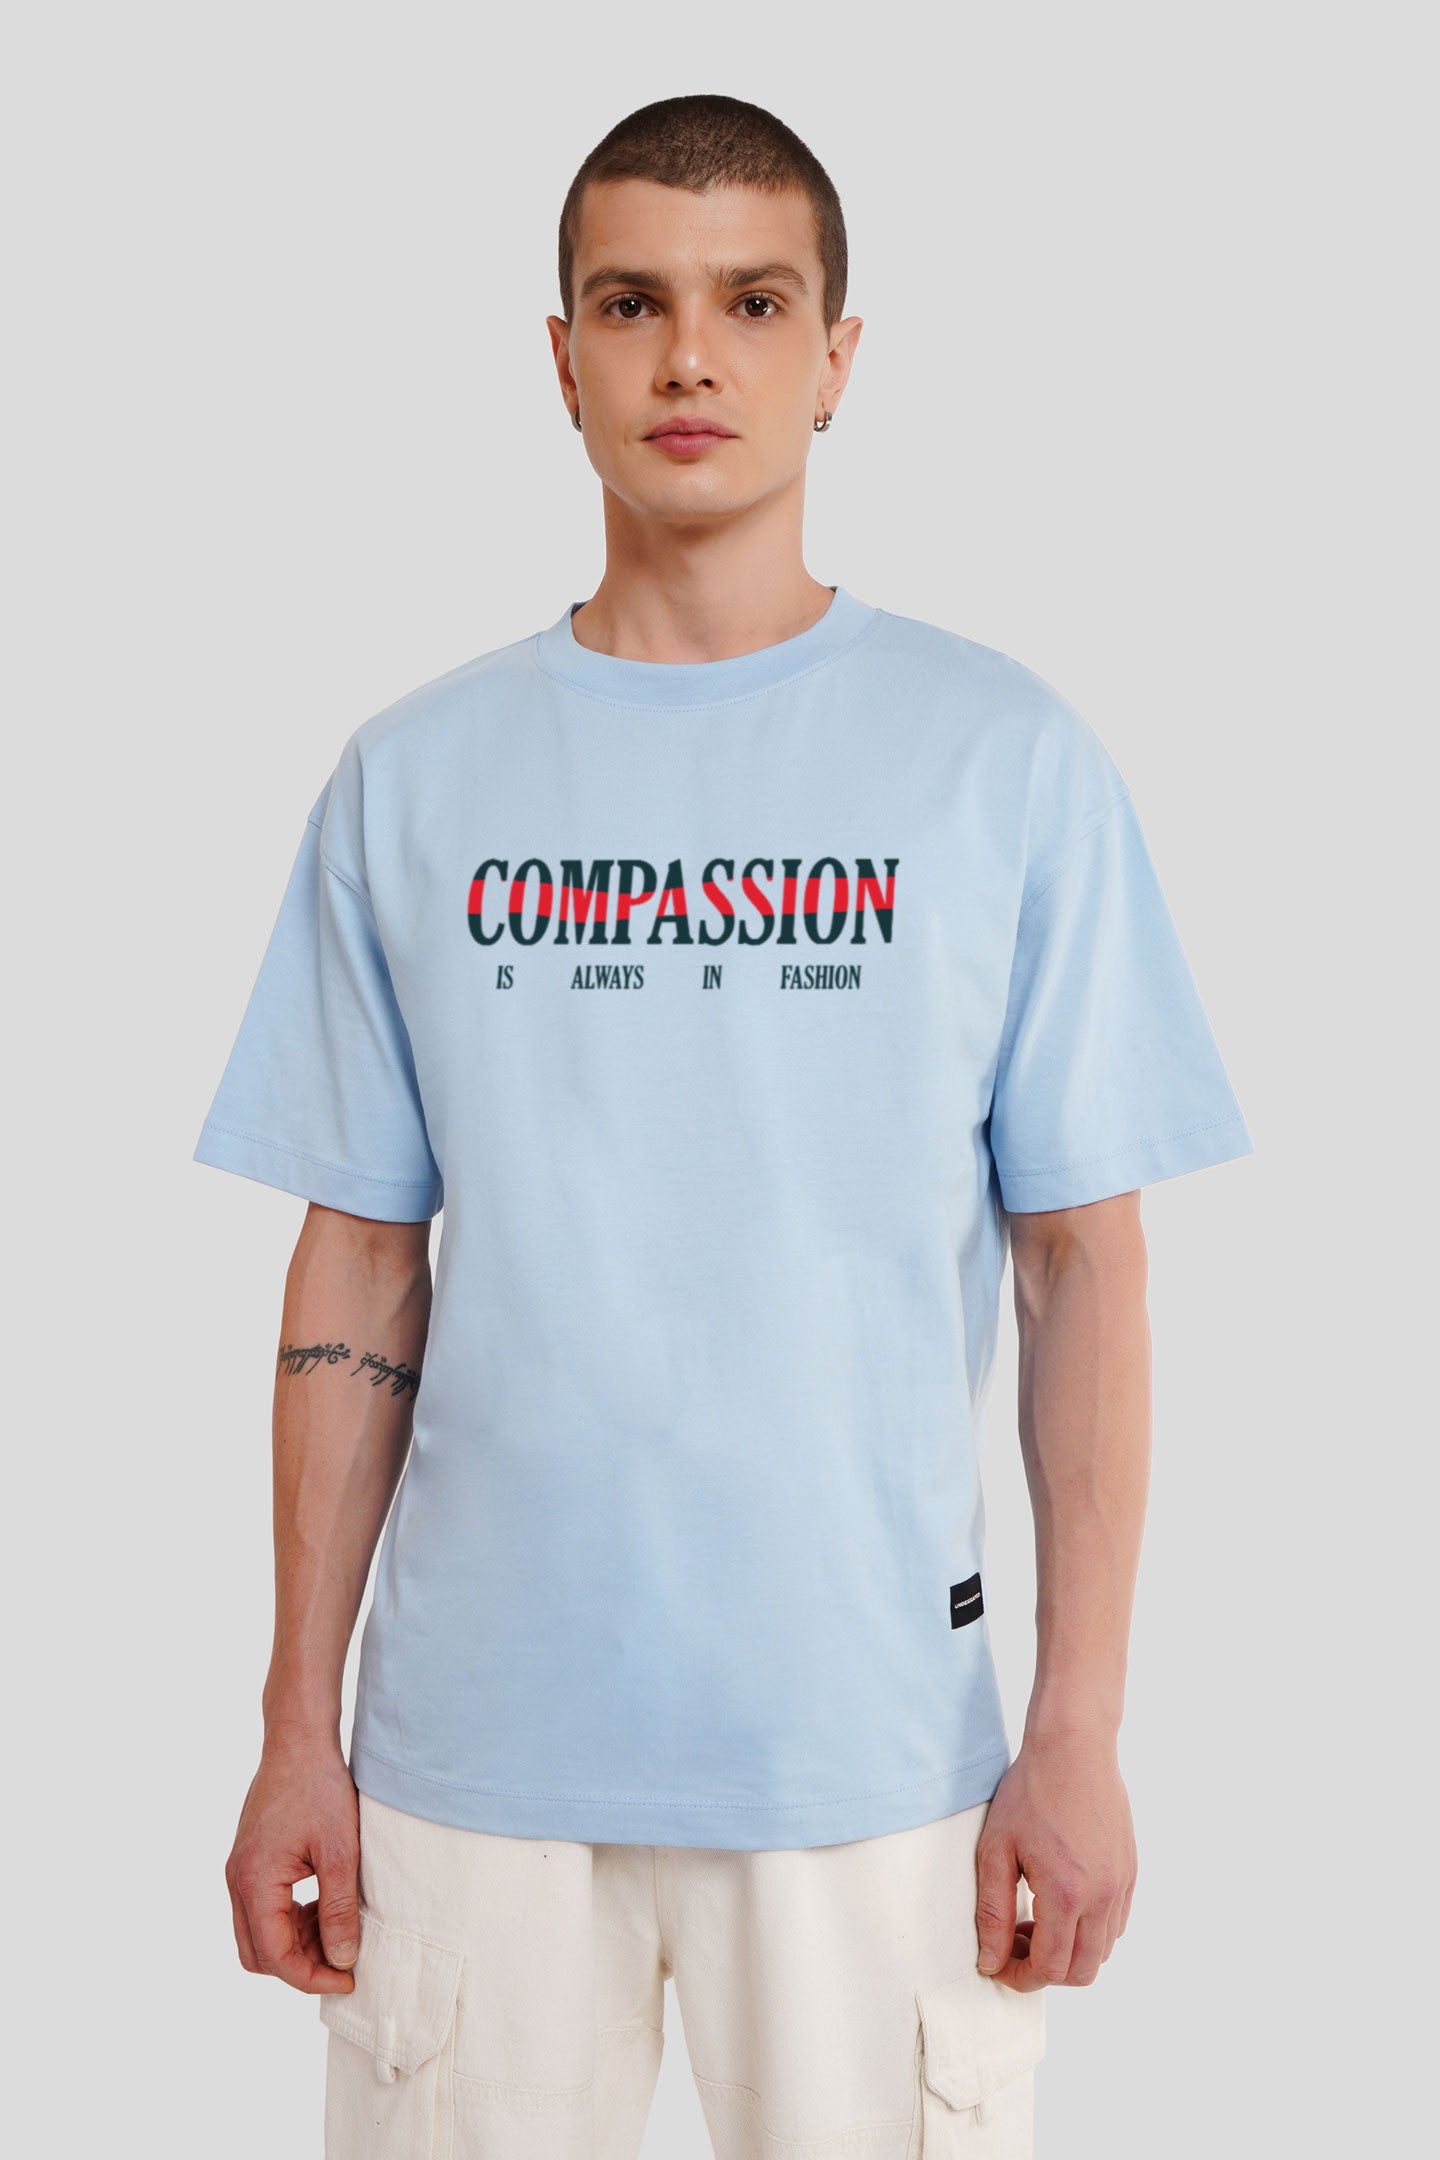 Compassion Powder Blue Printed T Shirt Men Oversized Fit With Front Design Pic 1